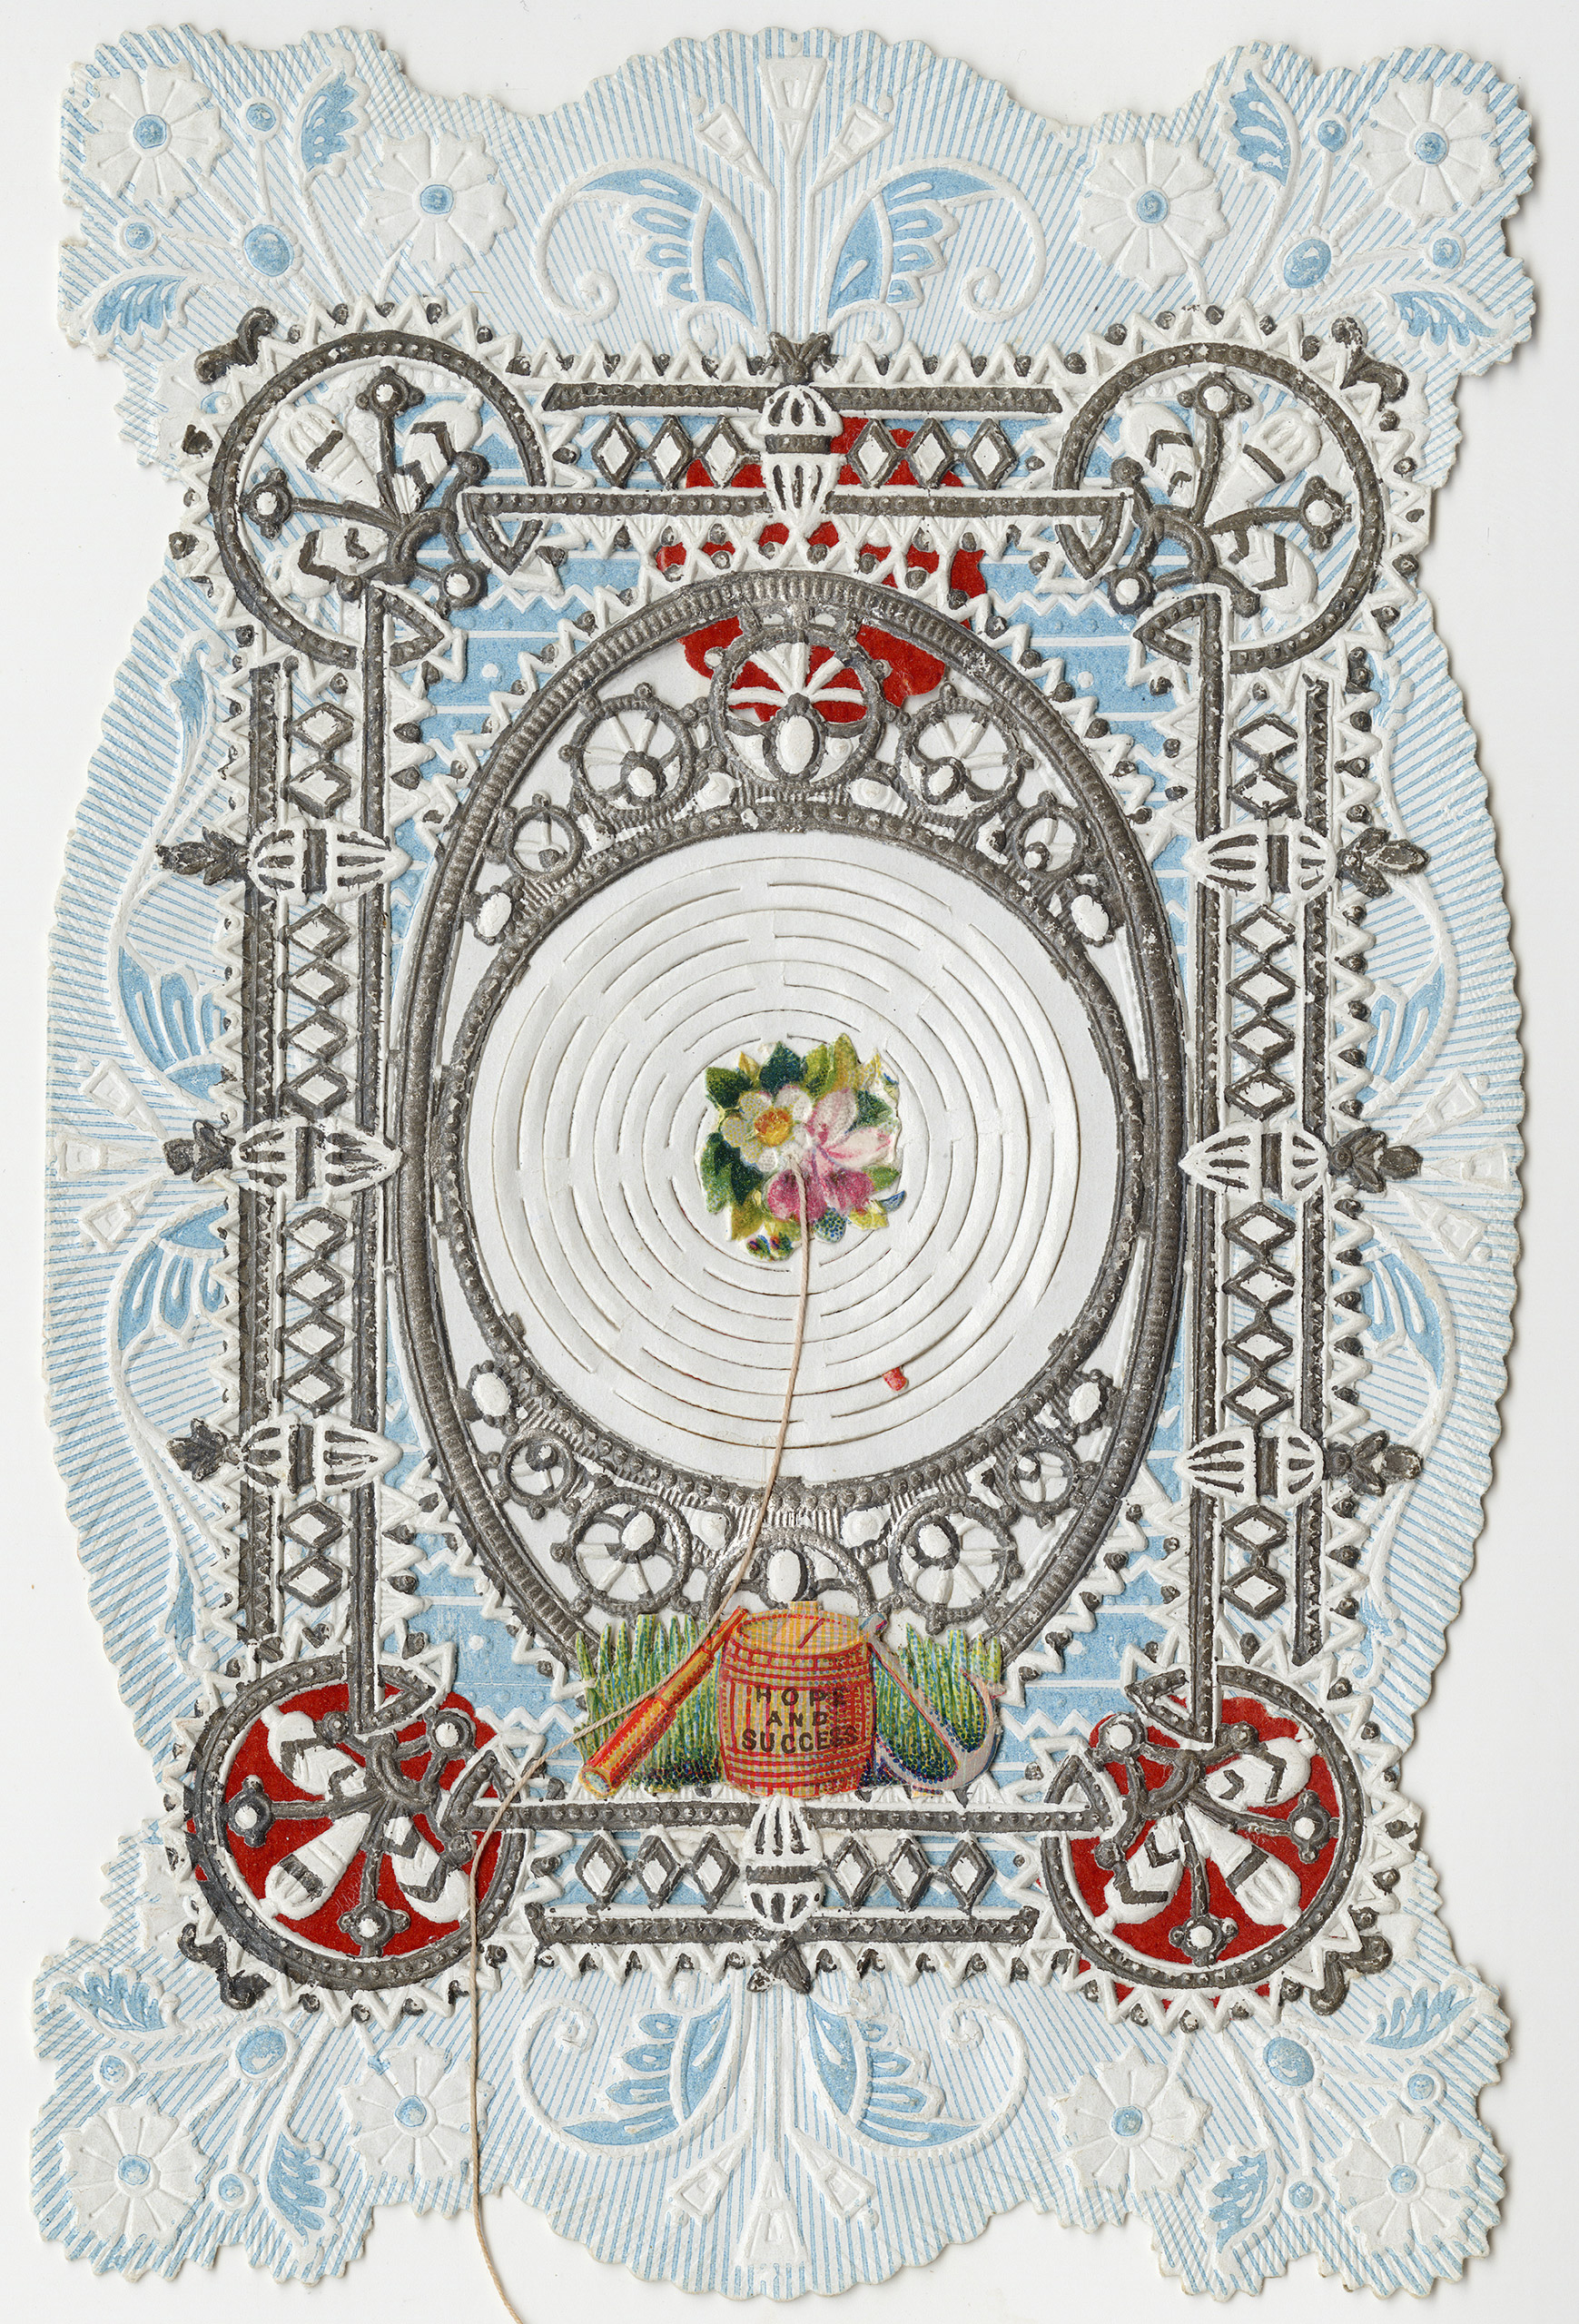 Esther Howland Valentine's Day card ca. 1870s.